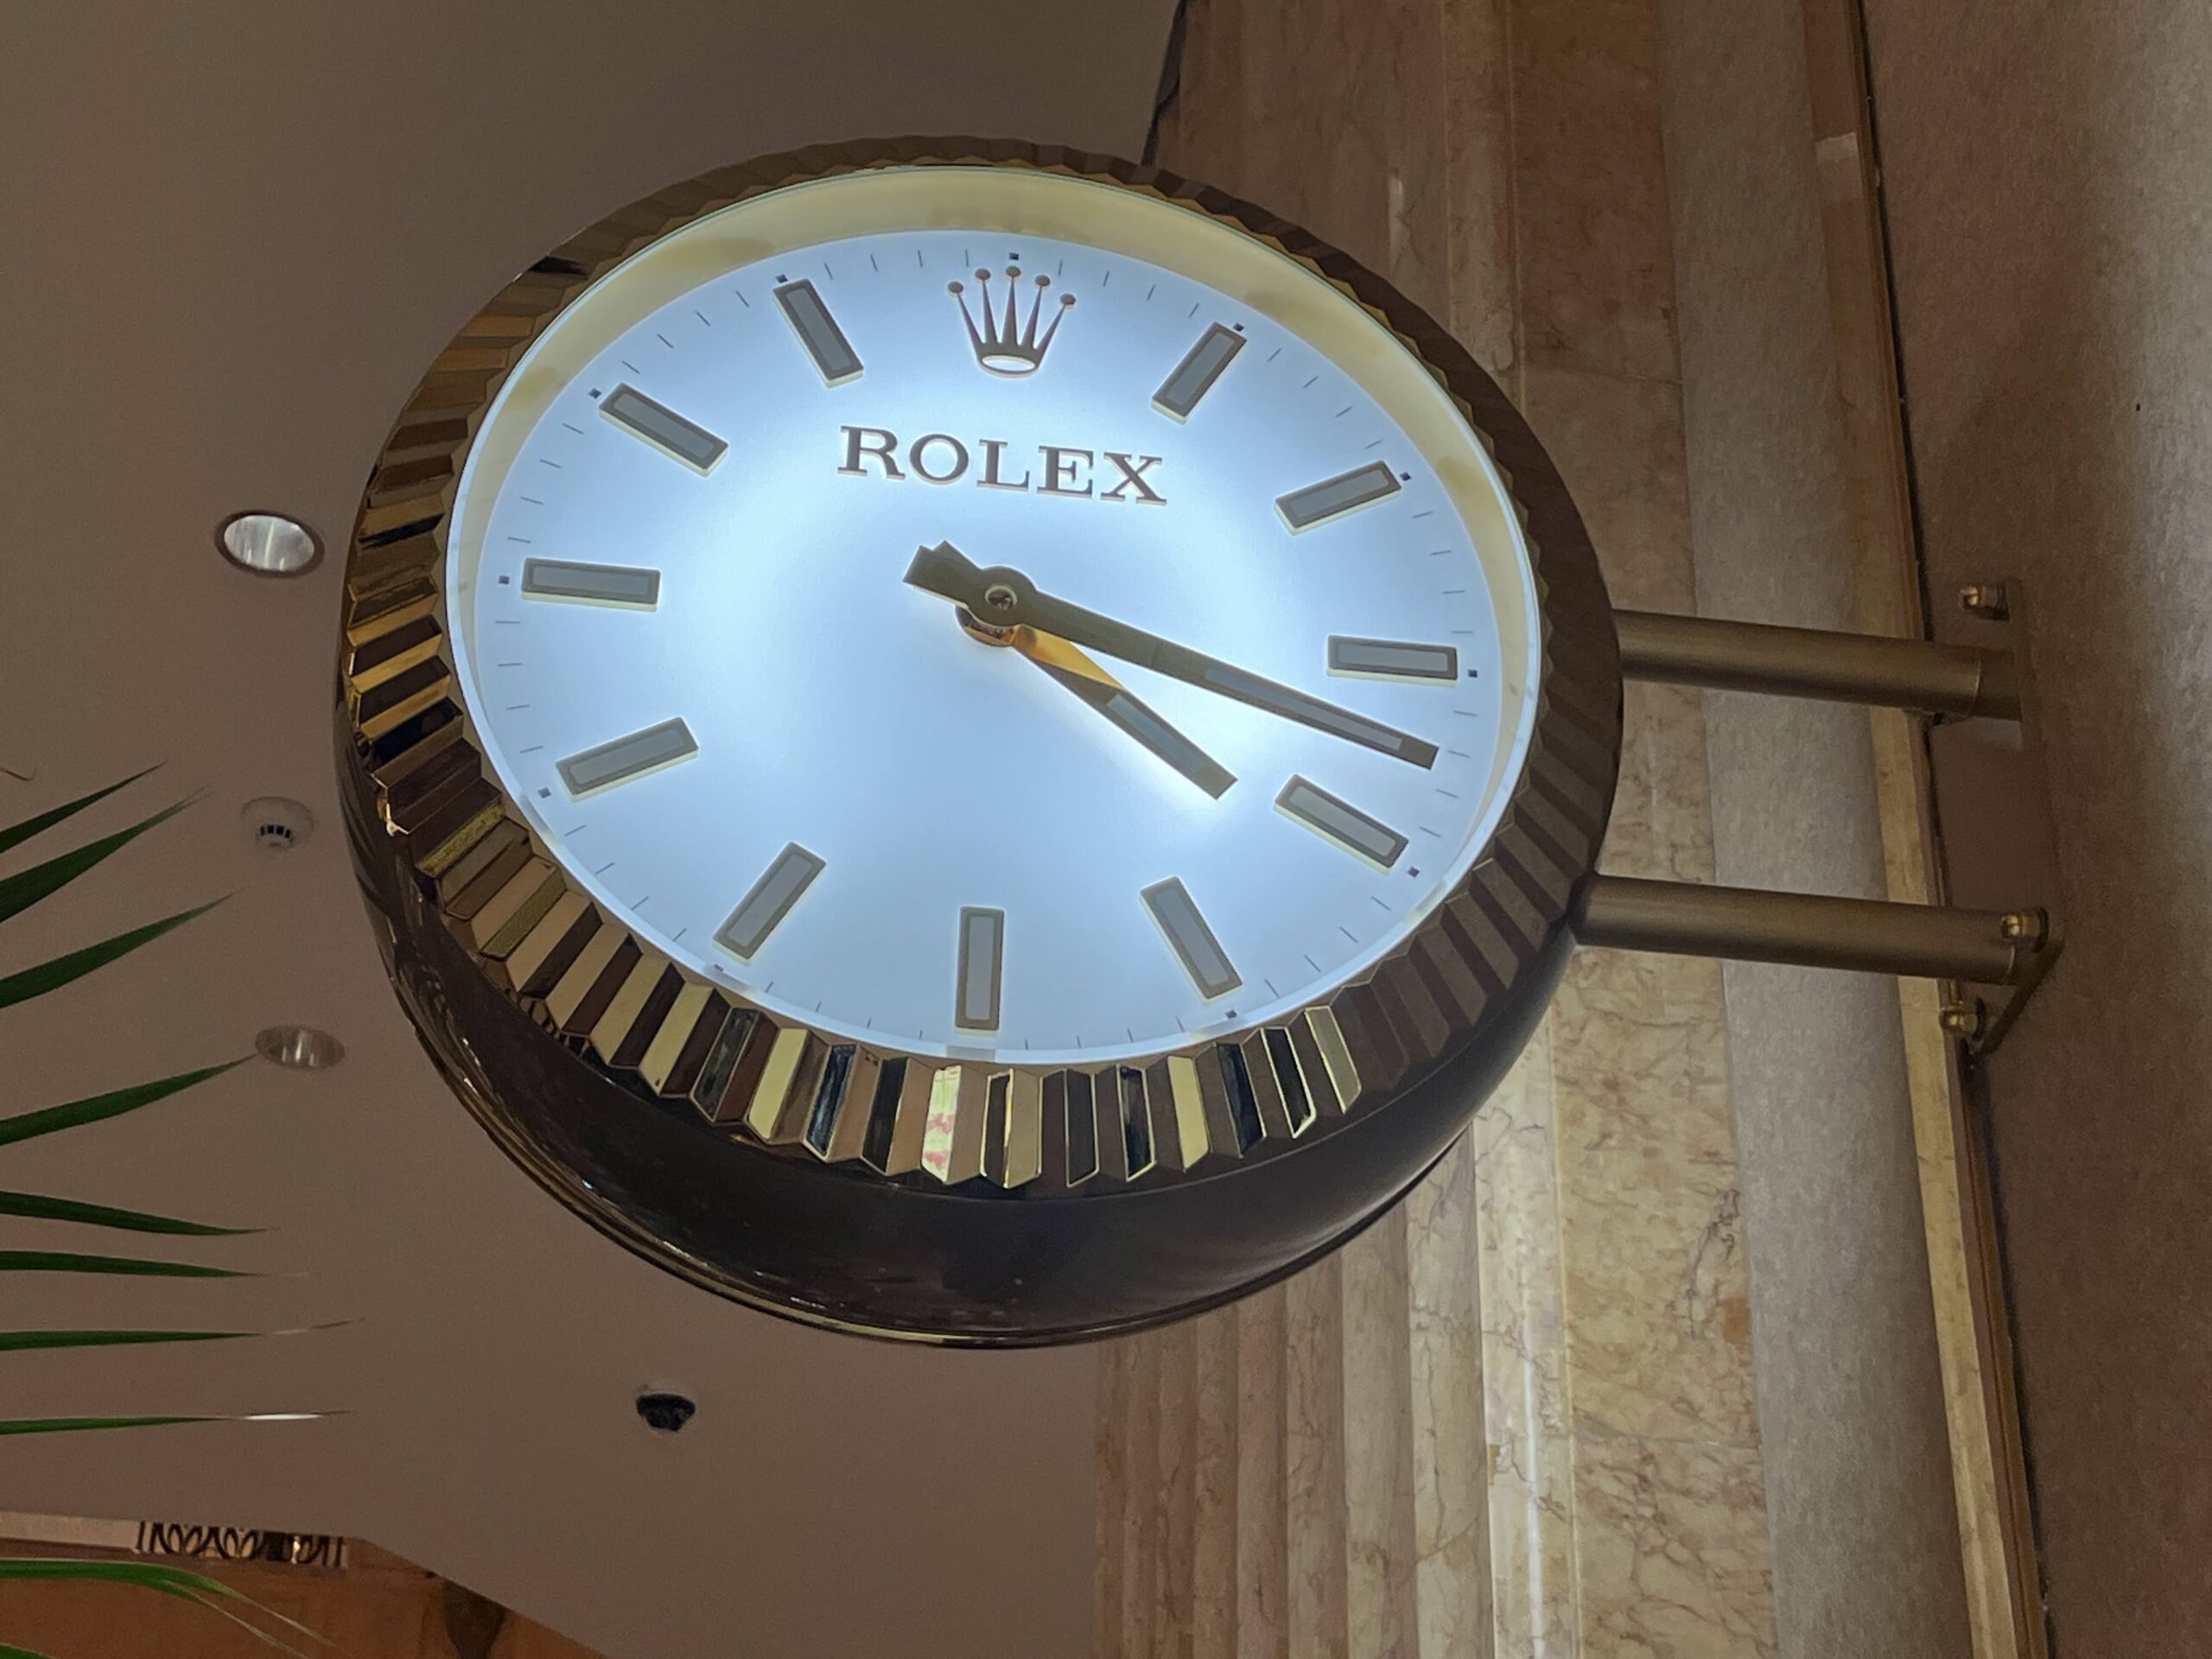 Luxury Rolex Watch at The Emirates Palace Hotel